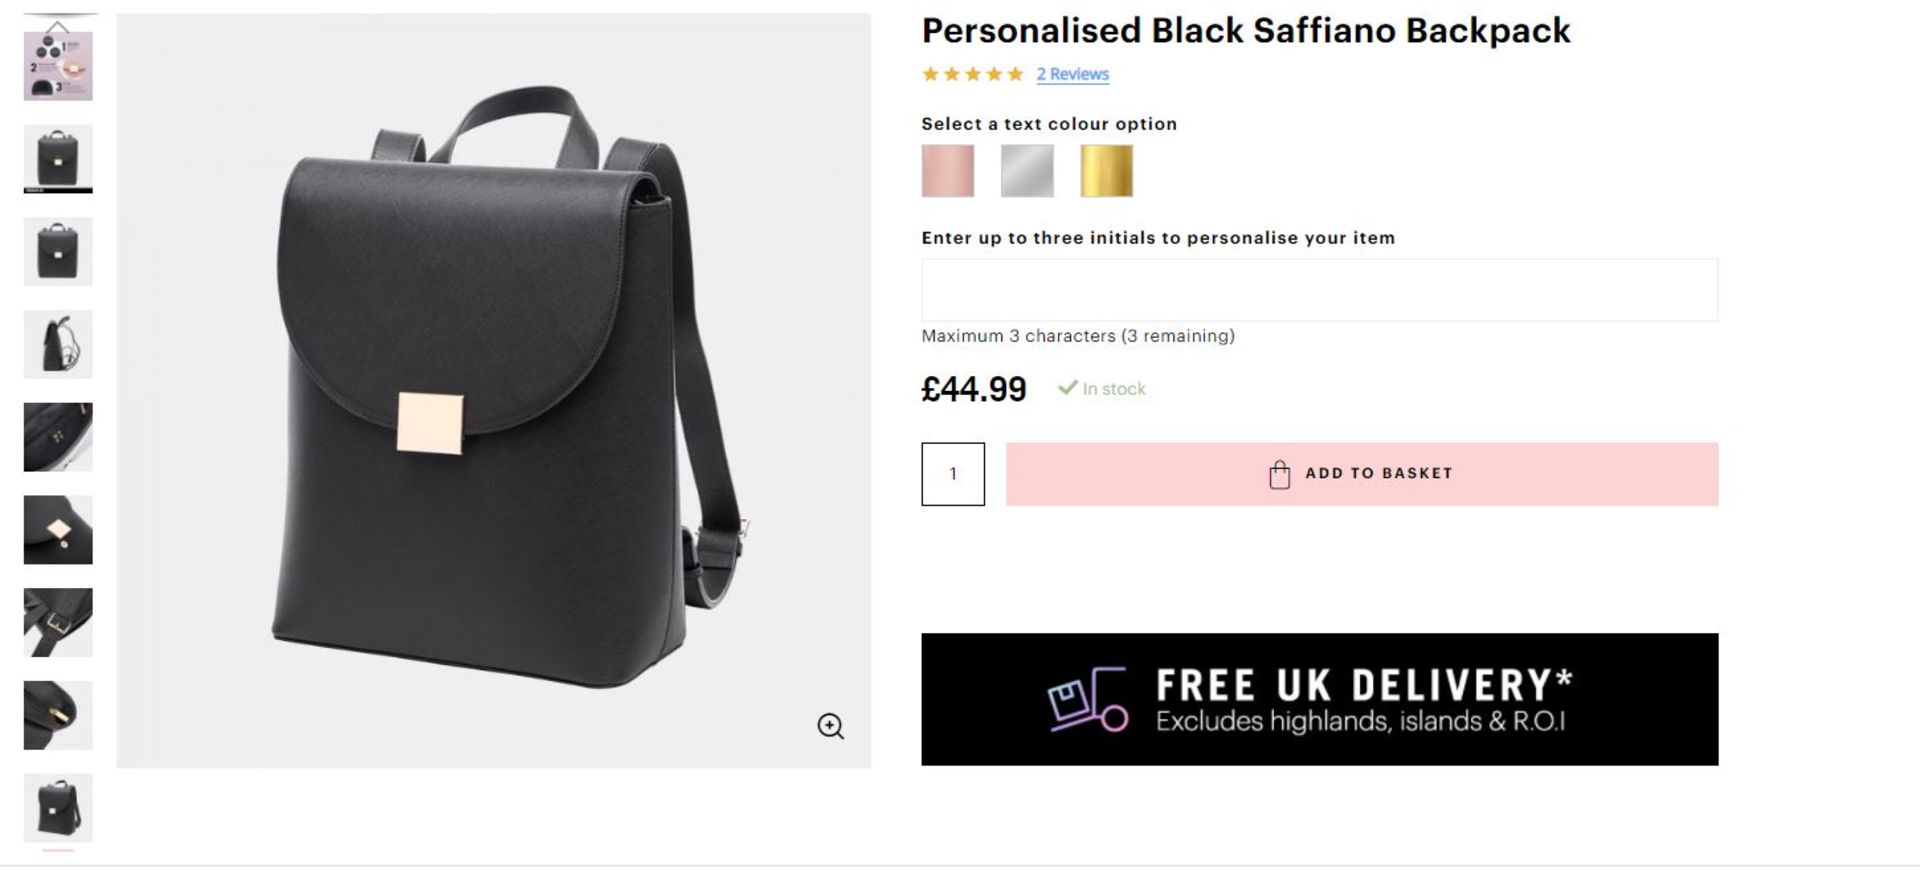 2 x NEW BOXED Saffiano Luxury Backpack - Black. RRP £49.99 each